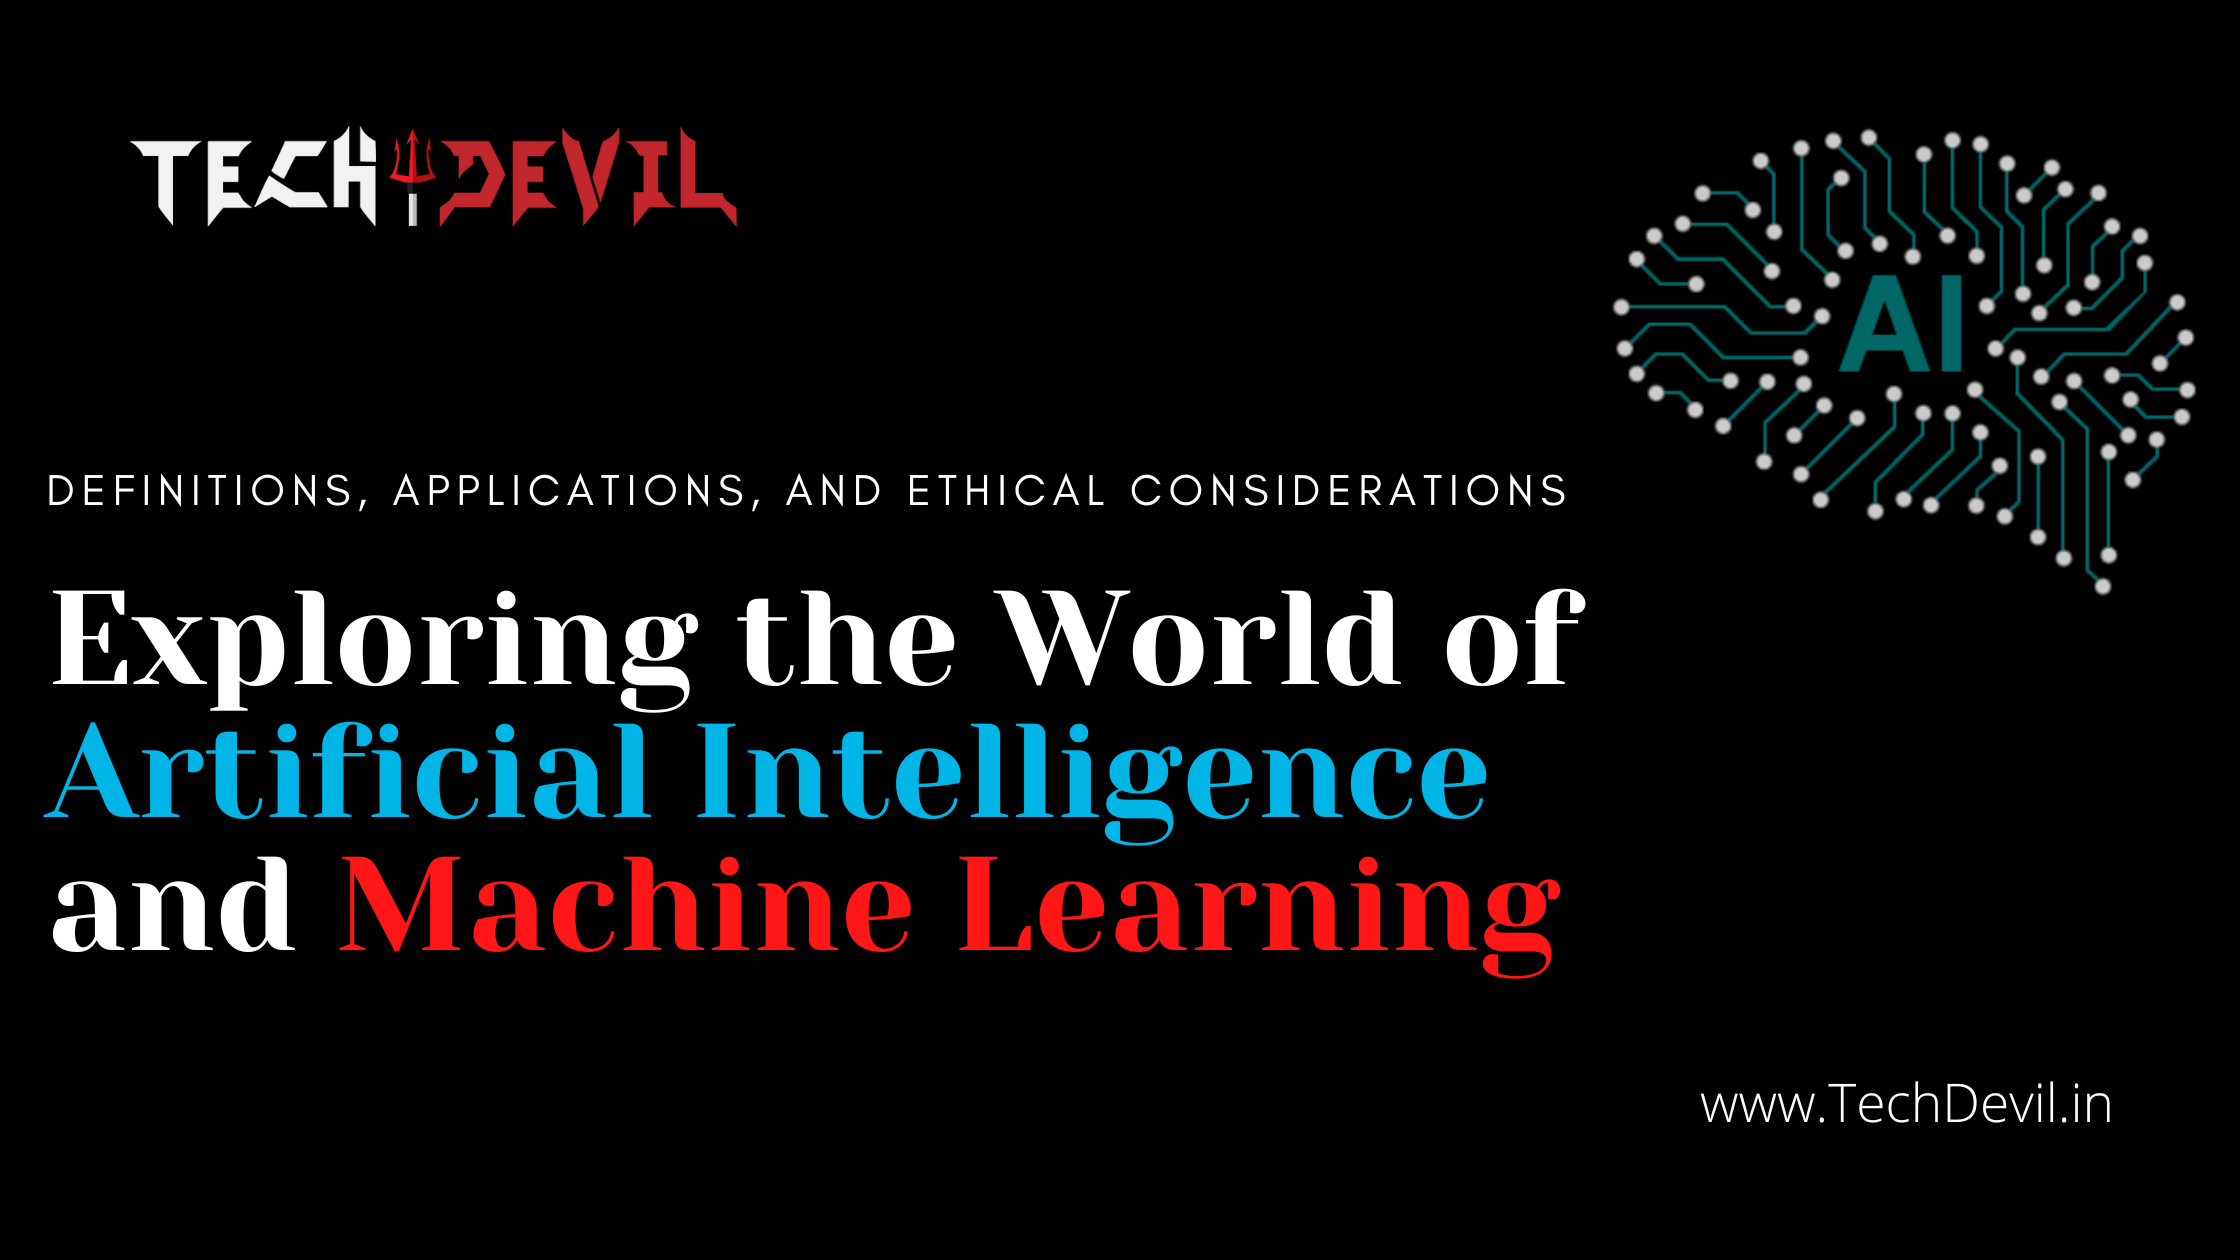 Exploring the World of Artificial Intelligence and Machine Learning: Definitions, Applications, and Ethical Considerations